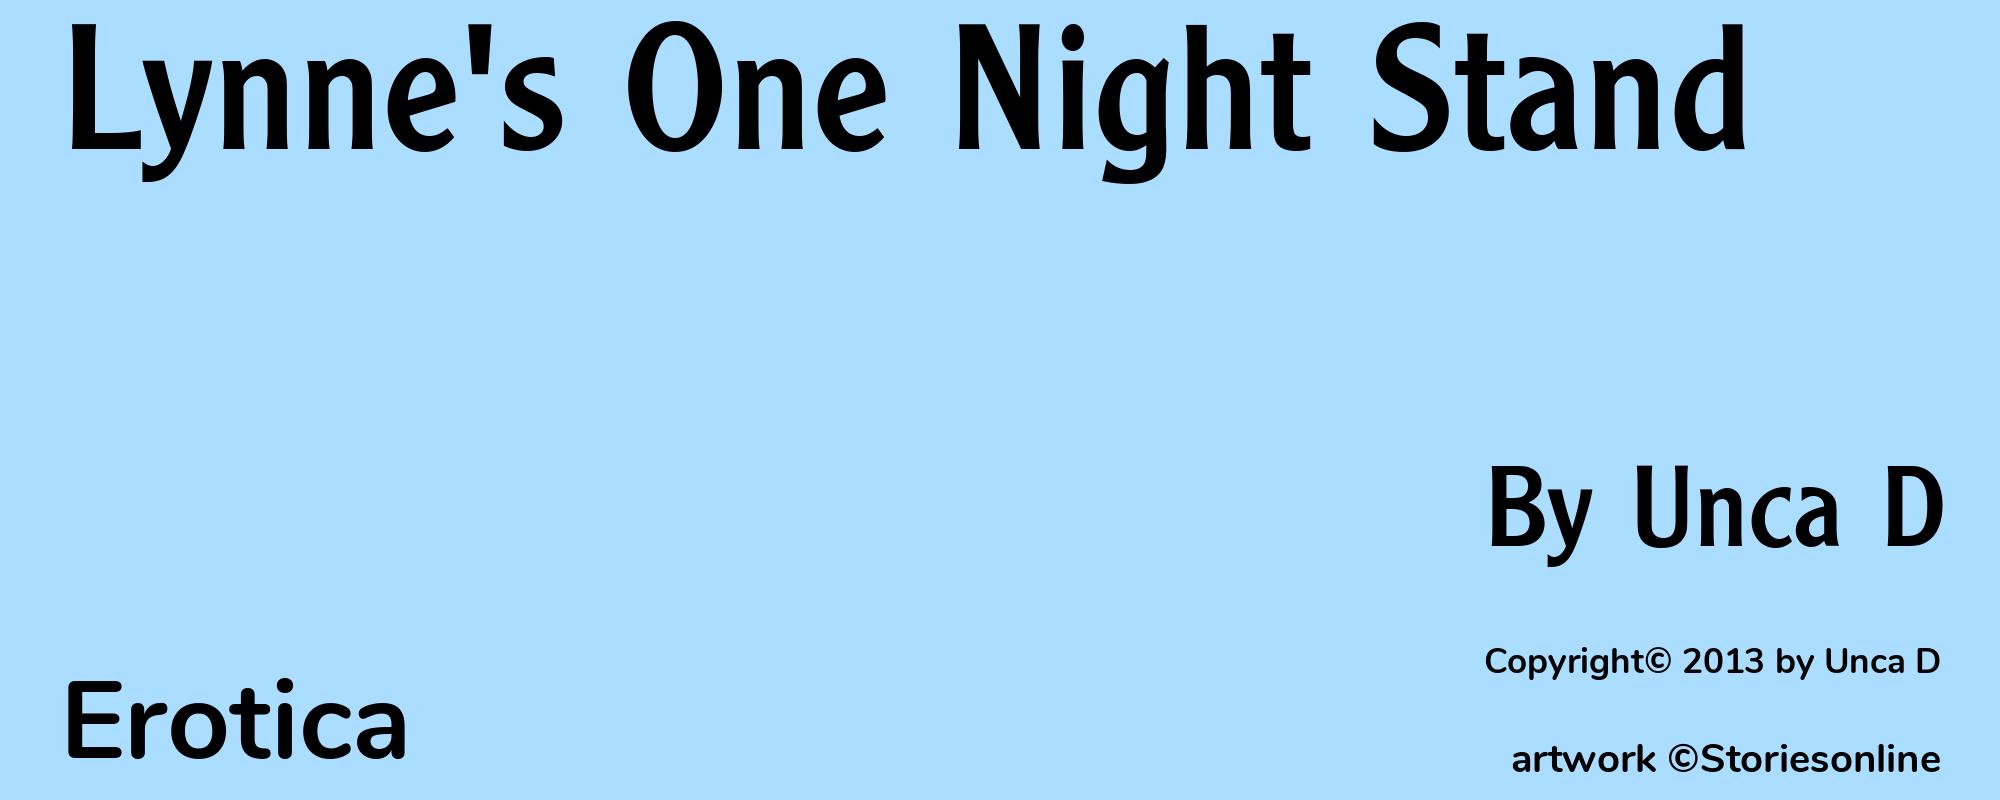 Lynne's One Night Stand - Cover